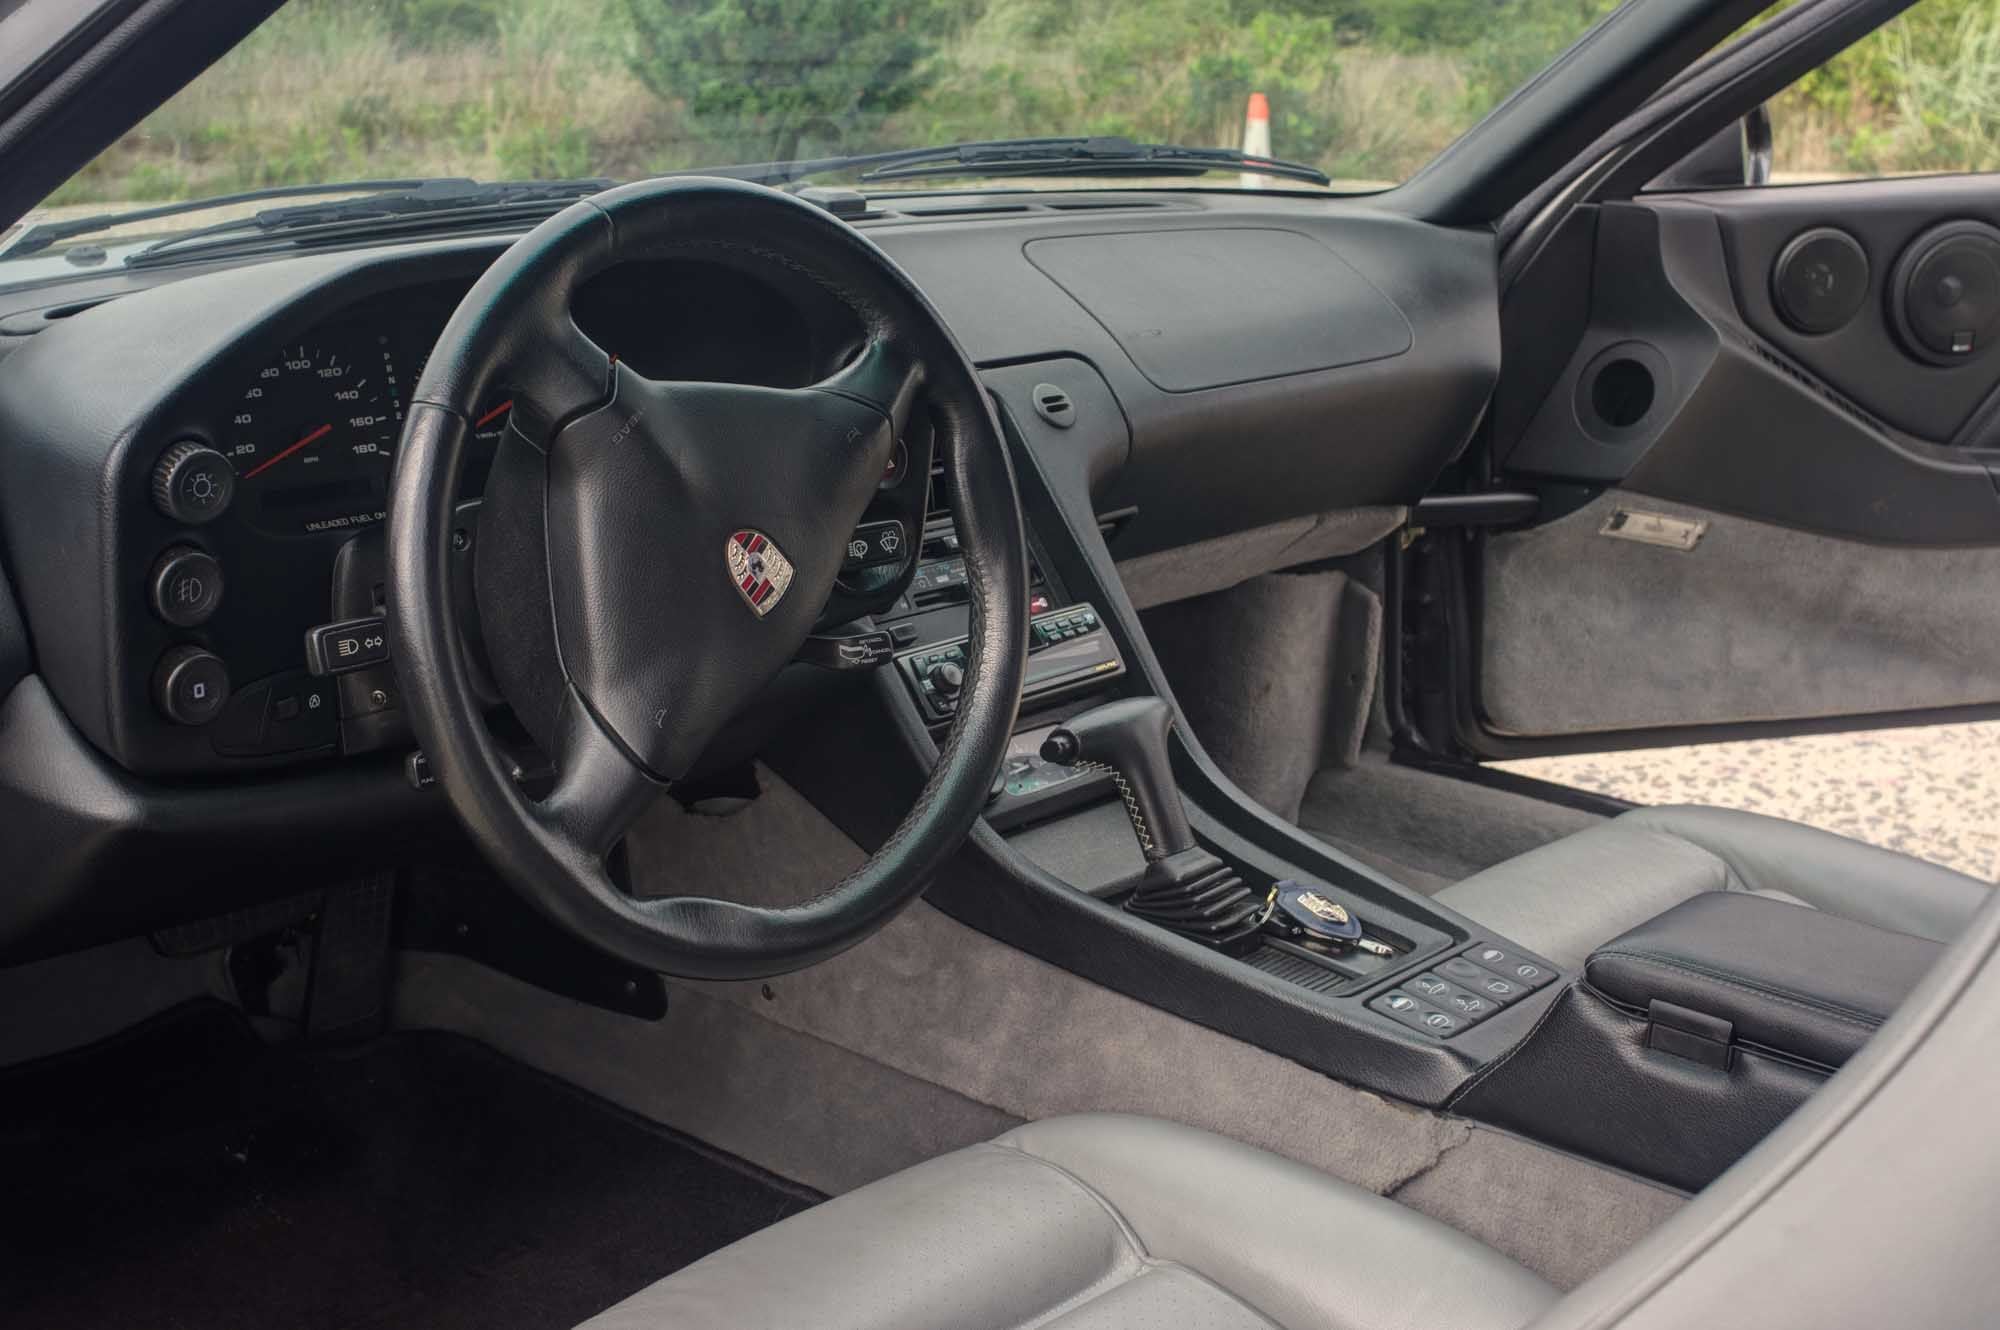 1993 Porsche 928 - 1993 928 GTS - Used - VIN WP0AA2922PS820127 - 82,750 Miles - 8 cyl - 2WD - Automatic - Hatchback - Gray - Long Island, NY 11789, United States